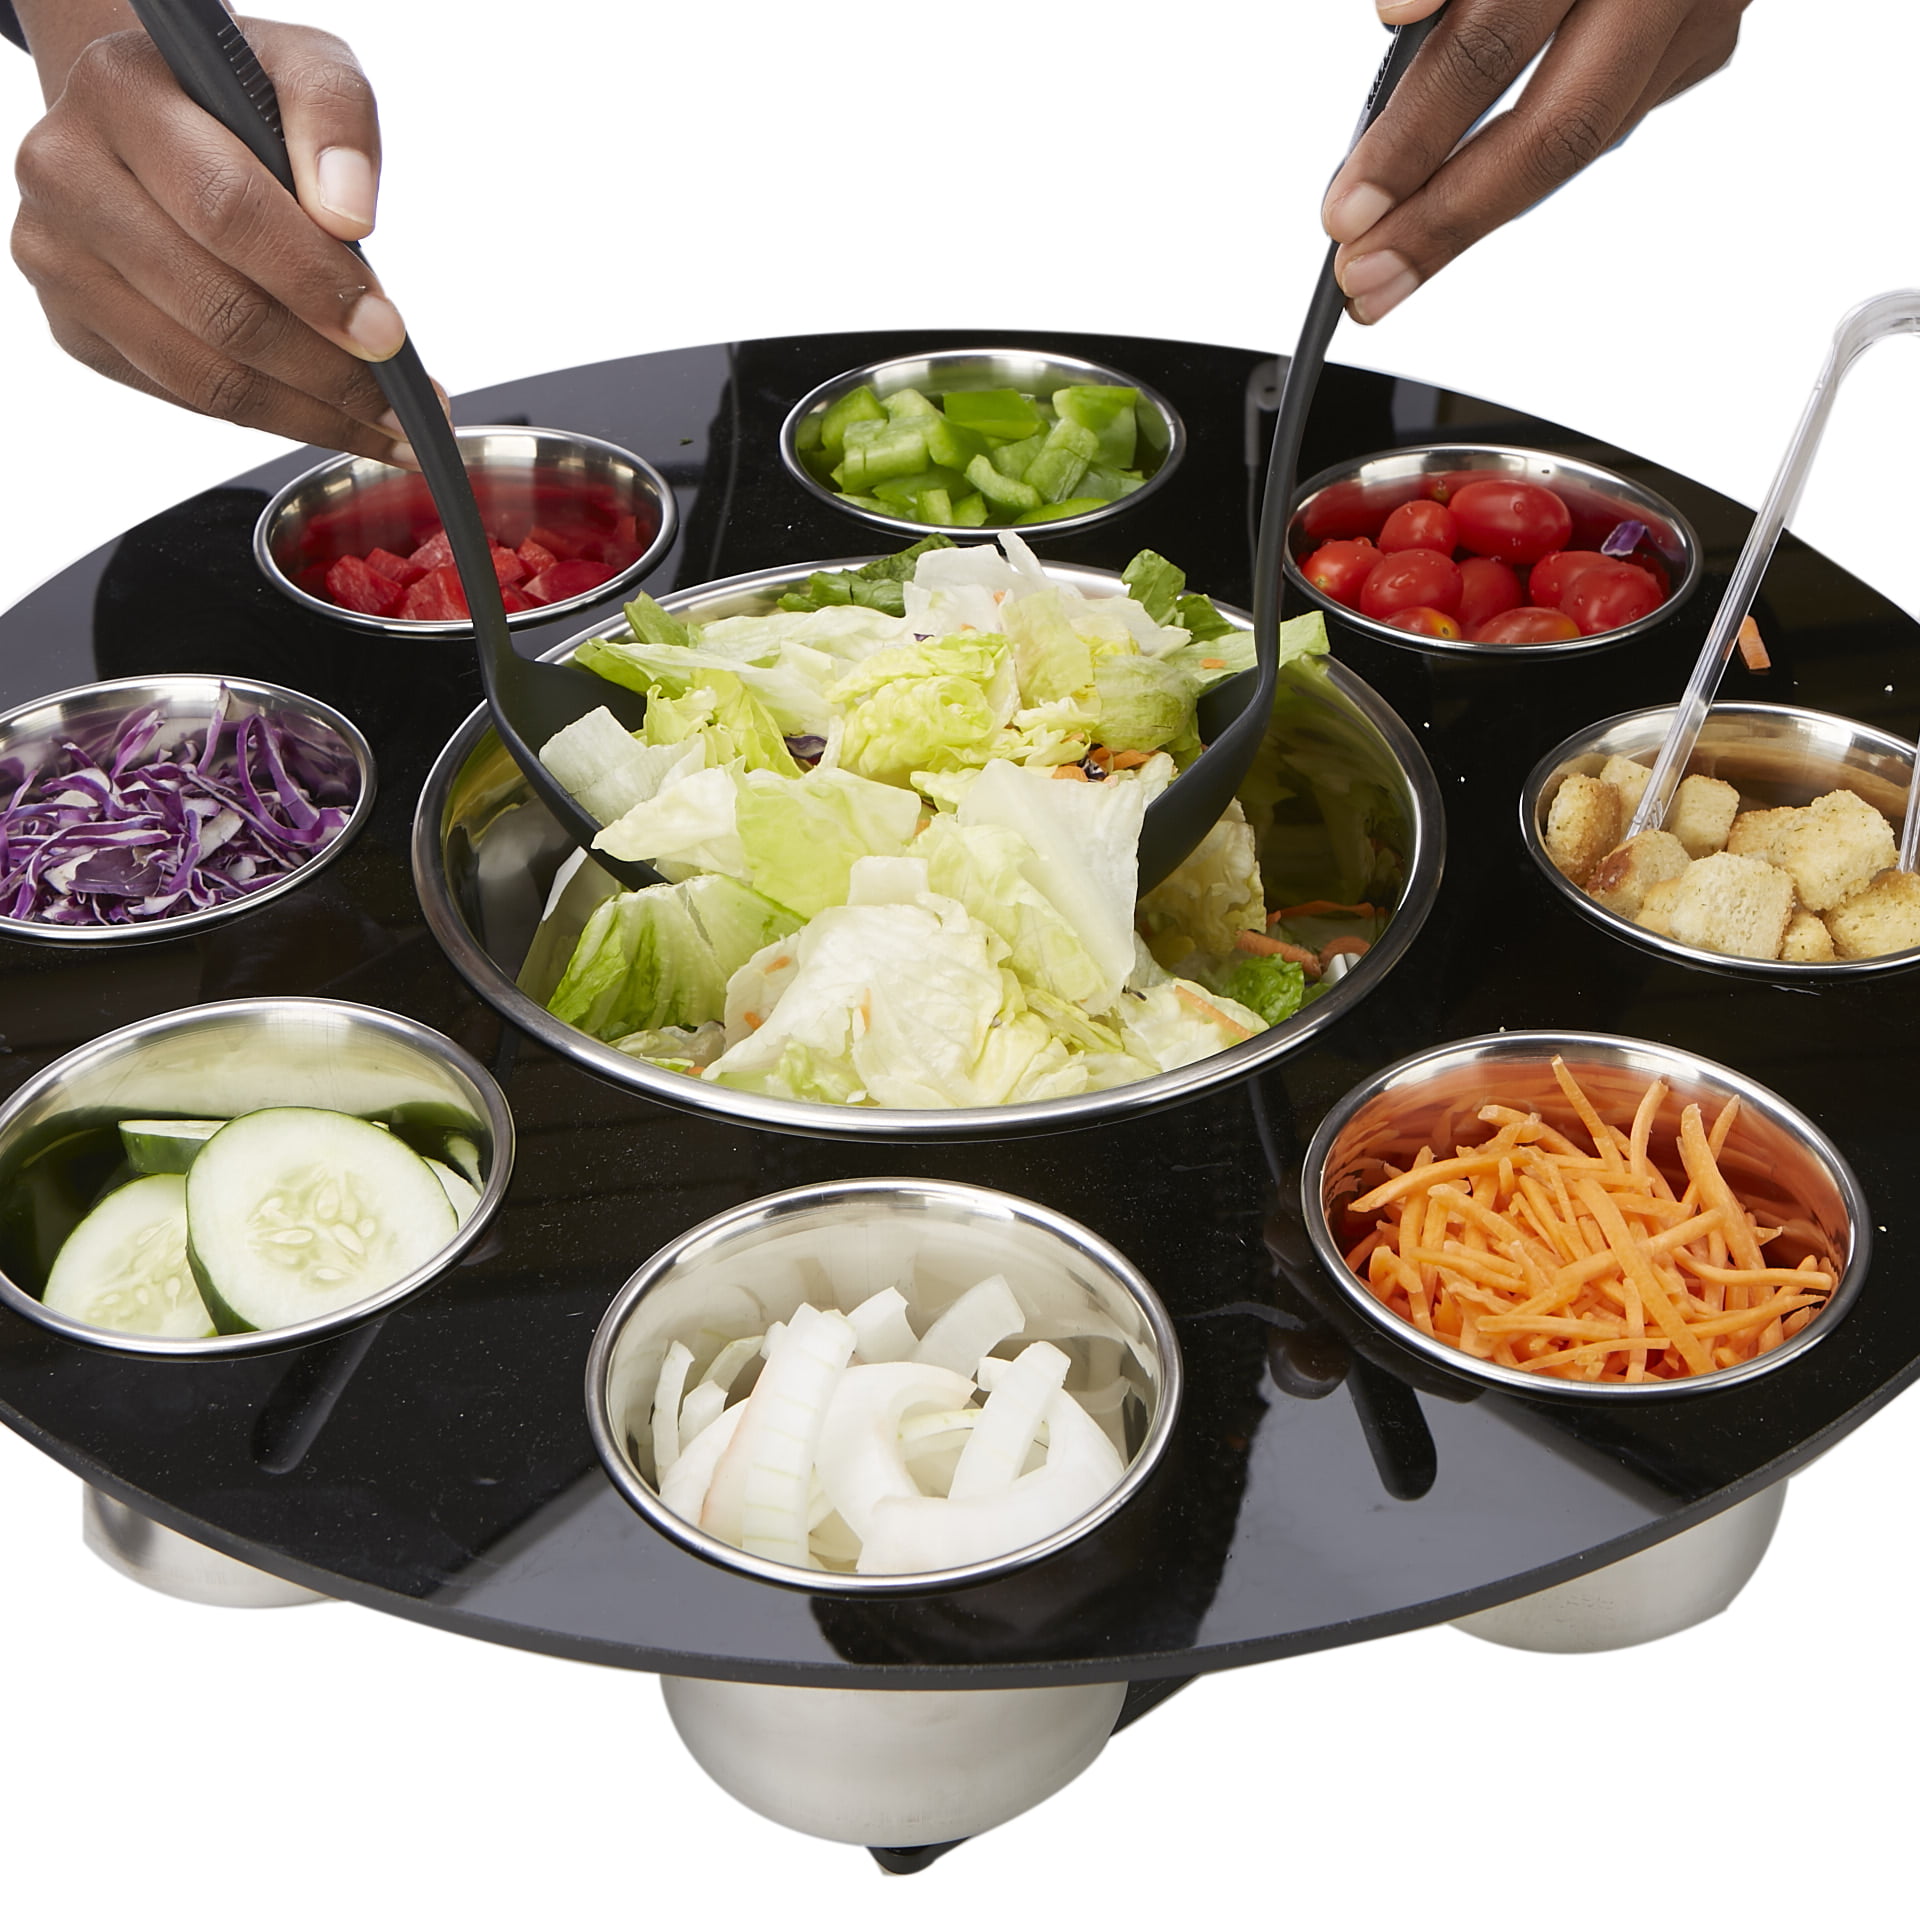 Fruit Mind Reader STAN-BLK 9 Compartment Salad Serving Tray One Size Veggie & Condiment Caddy Chips & Dips Holder for Partys Black Acrylic